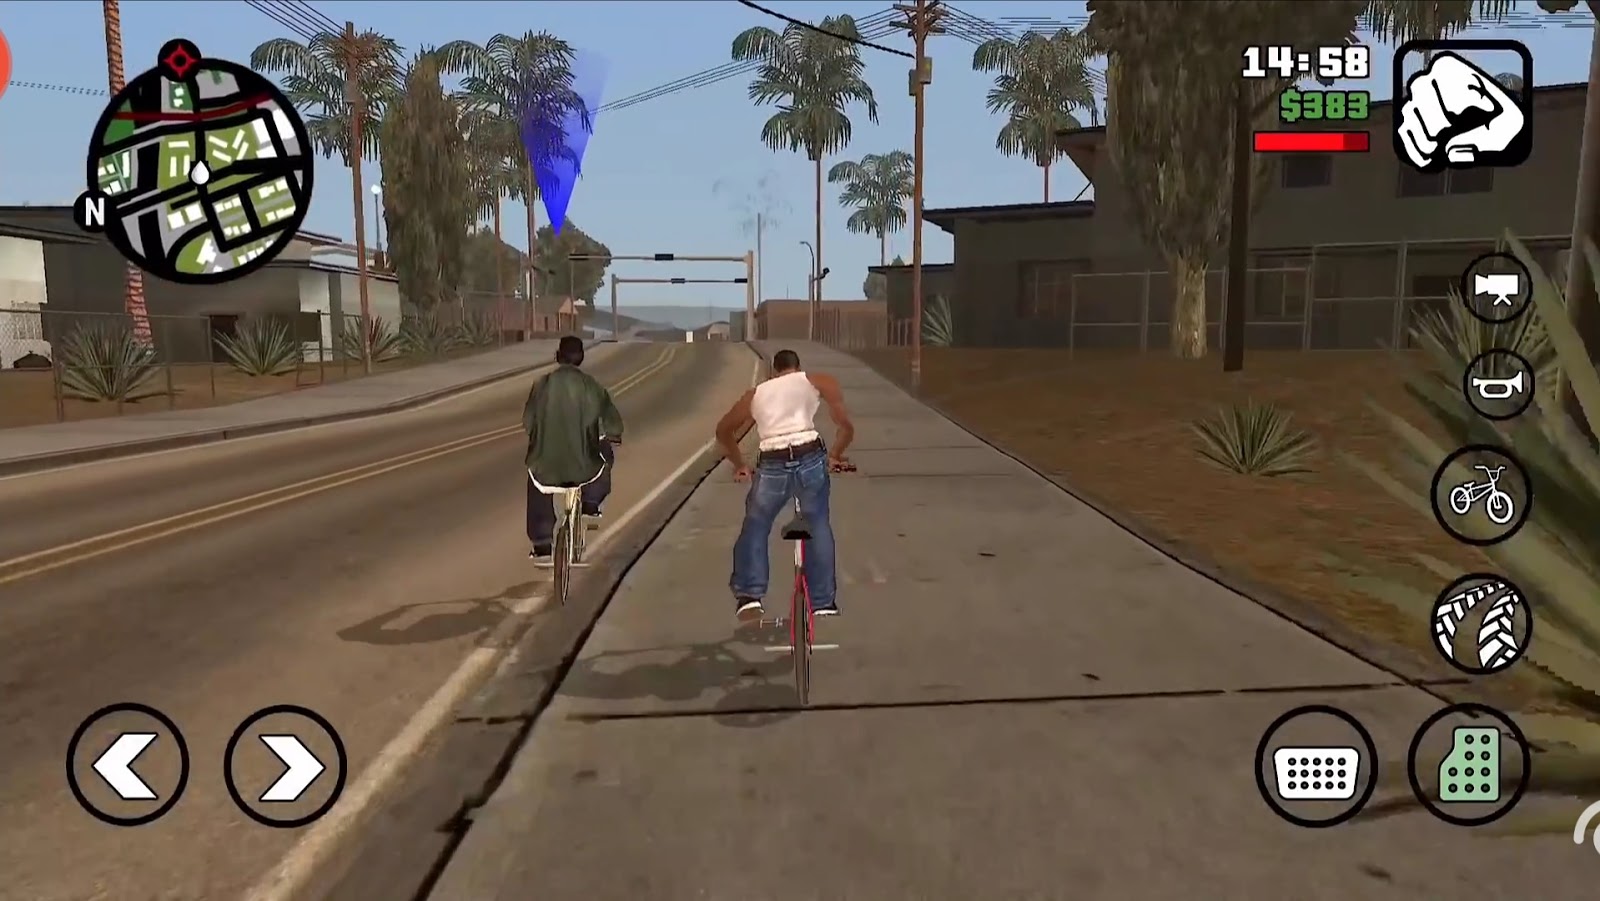 Download Gta San Andreas New Latest Version 2.00 Full Game